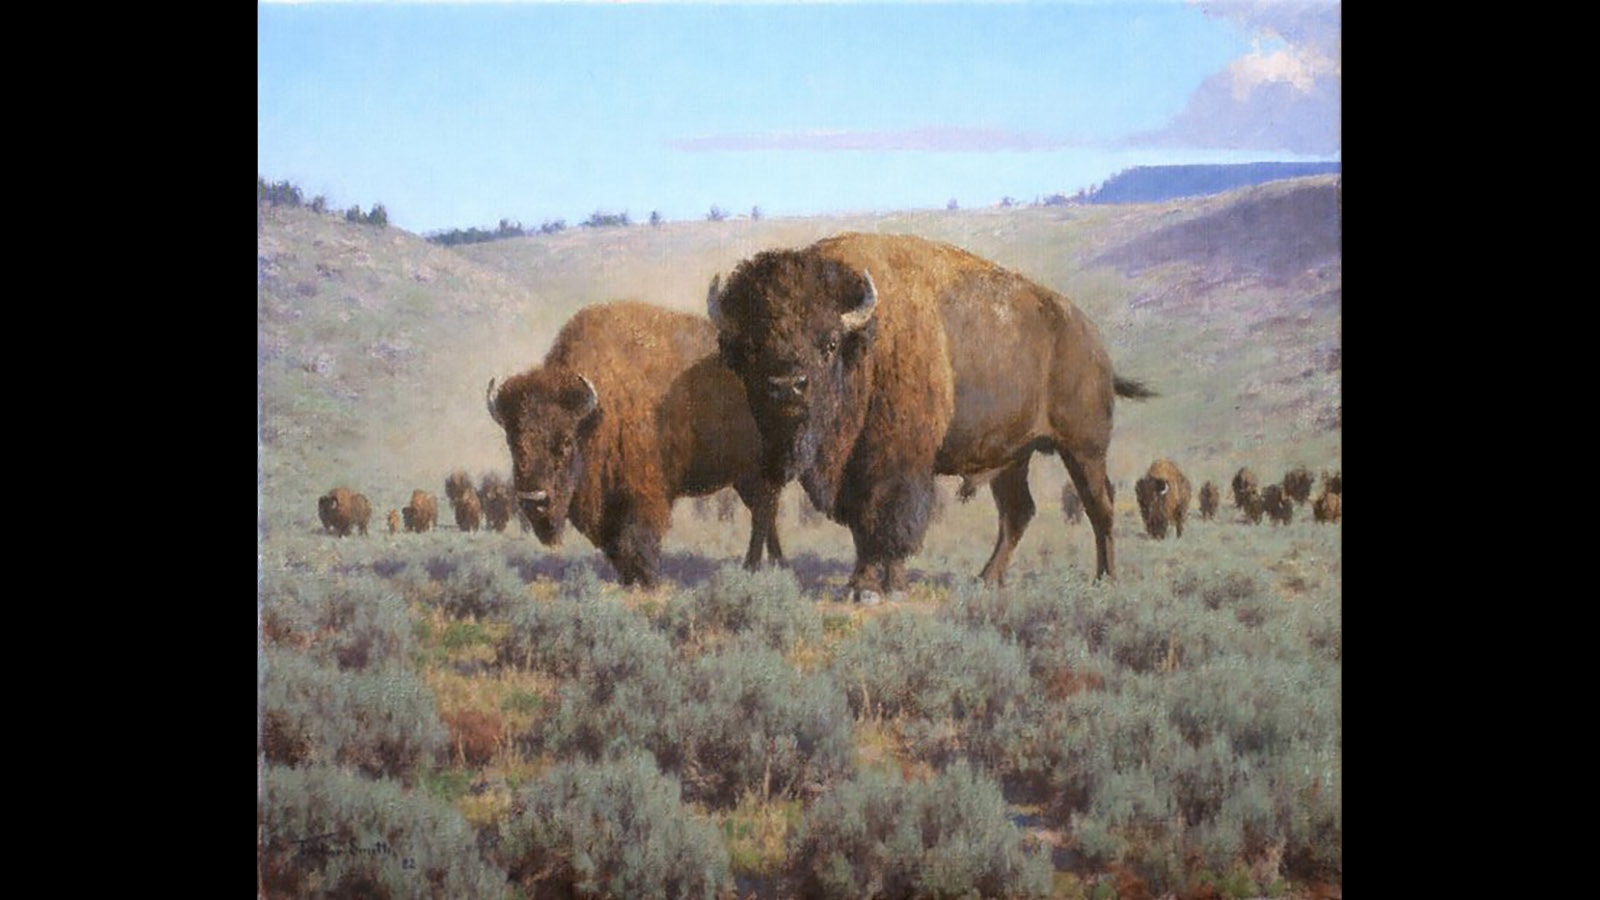 "Wyoming Buffalo,” a 20 x 24-inch oil painting by Tucker Smith, was auctioned off in the 41st Buffalo Bill Art Show and Sale in 2022. It was the highest-selling piece that year, earning $55,000.